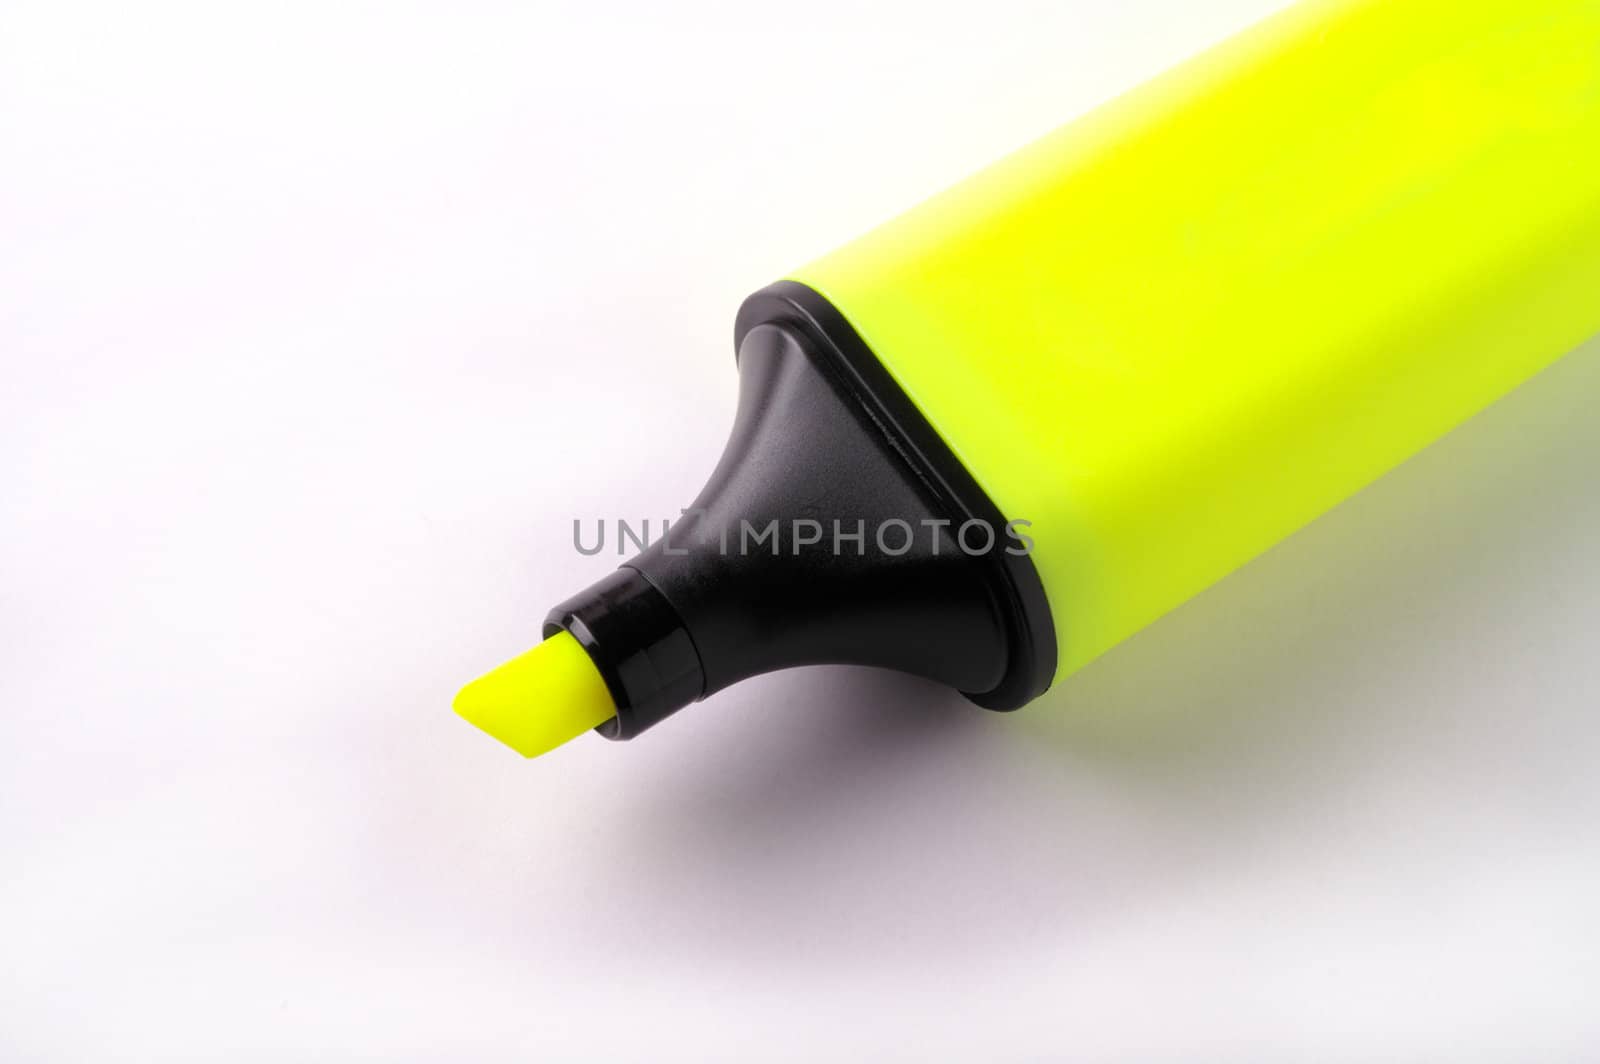 Highlighter isolated with clipping path